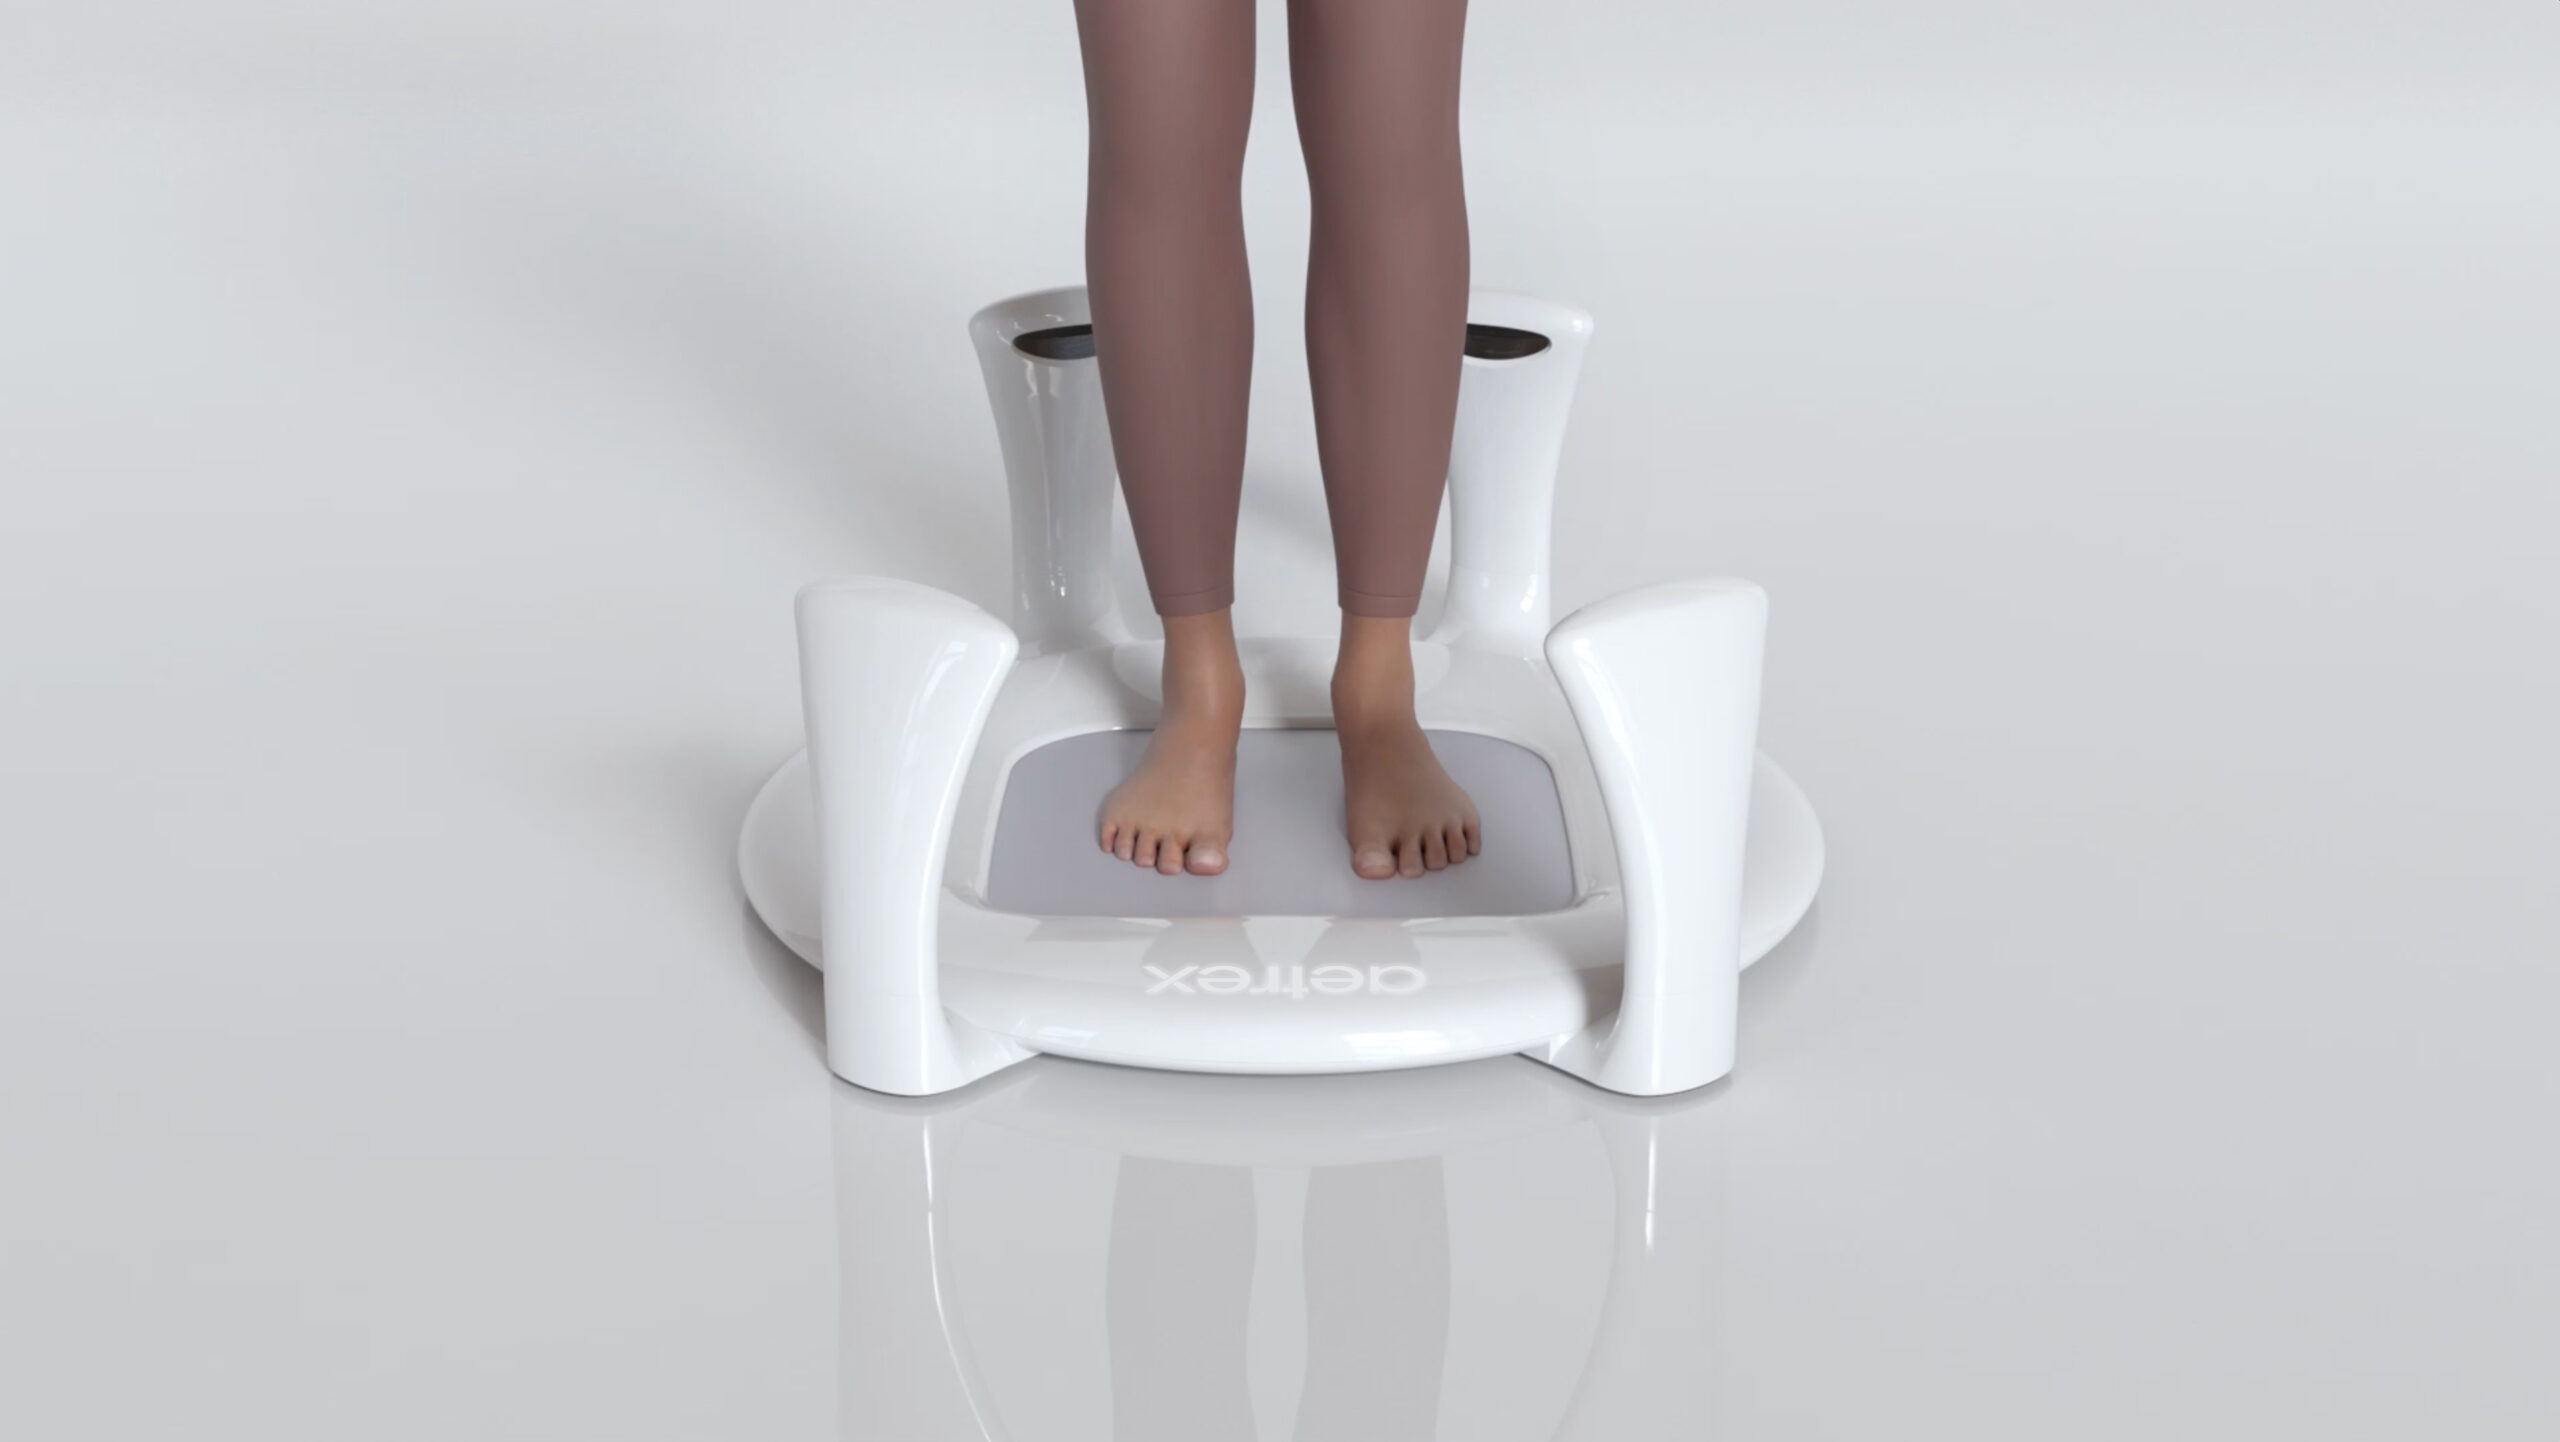 Leading Brands Leverage Aetrex’s 3D Foot Scanning Technology to Enhance Fit and Performance